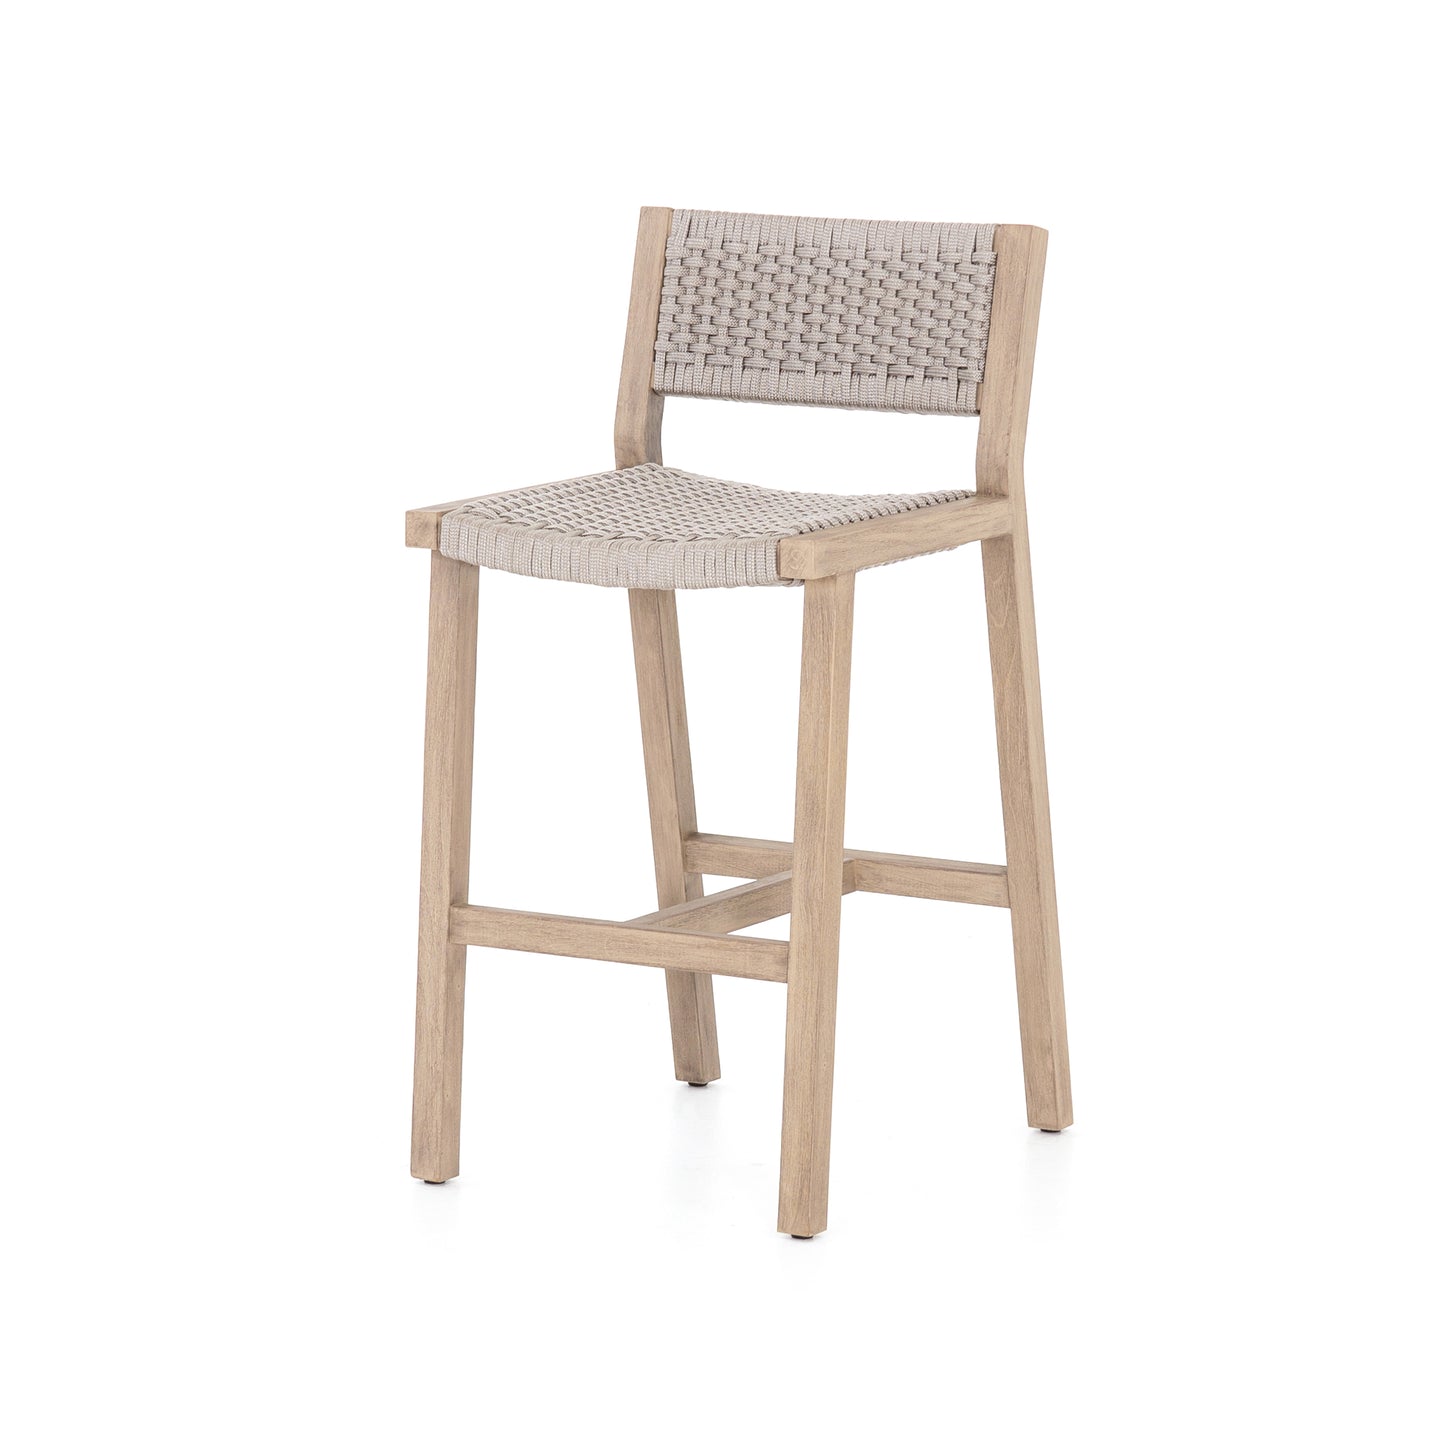 Delano Outdoor Bar + Counter Stool Counter / Washed BrownBAR AND COUNTER STOOL Four Hands  Counter Washed Brown  Four Hands, Mid Century Modern Furniture, Old Bones Furniture Company, Old Bones Co, Modern Mid Century, Designer Furniture, https://www.oldbonesco.com/